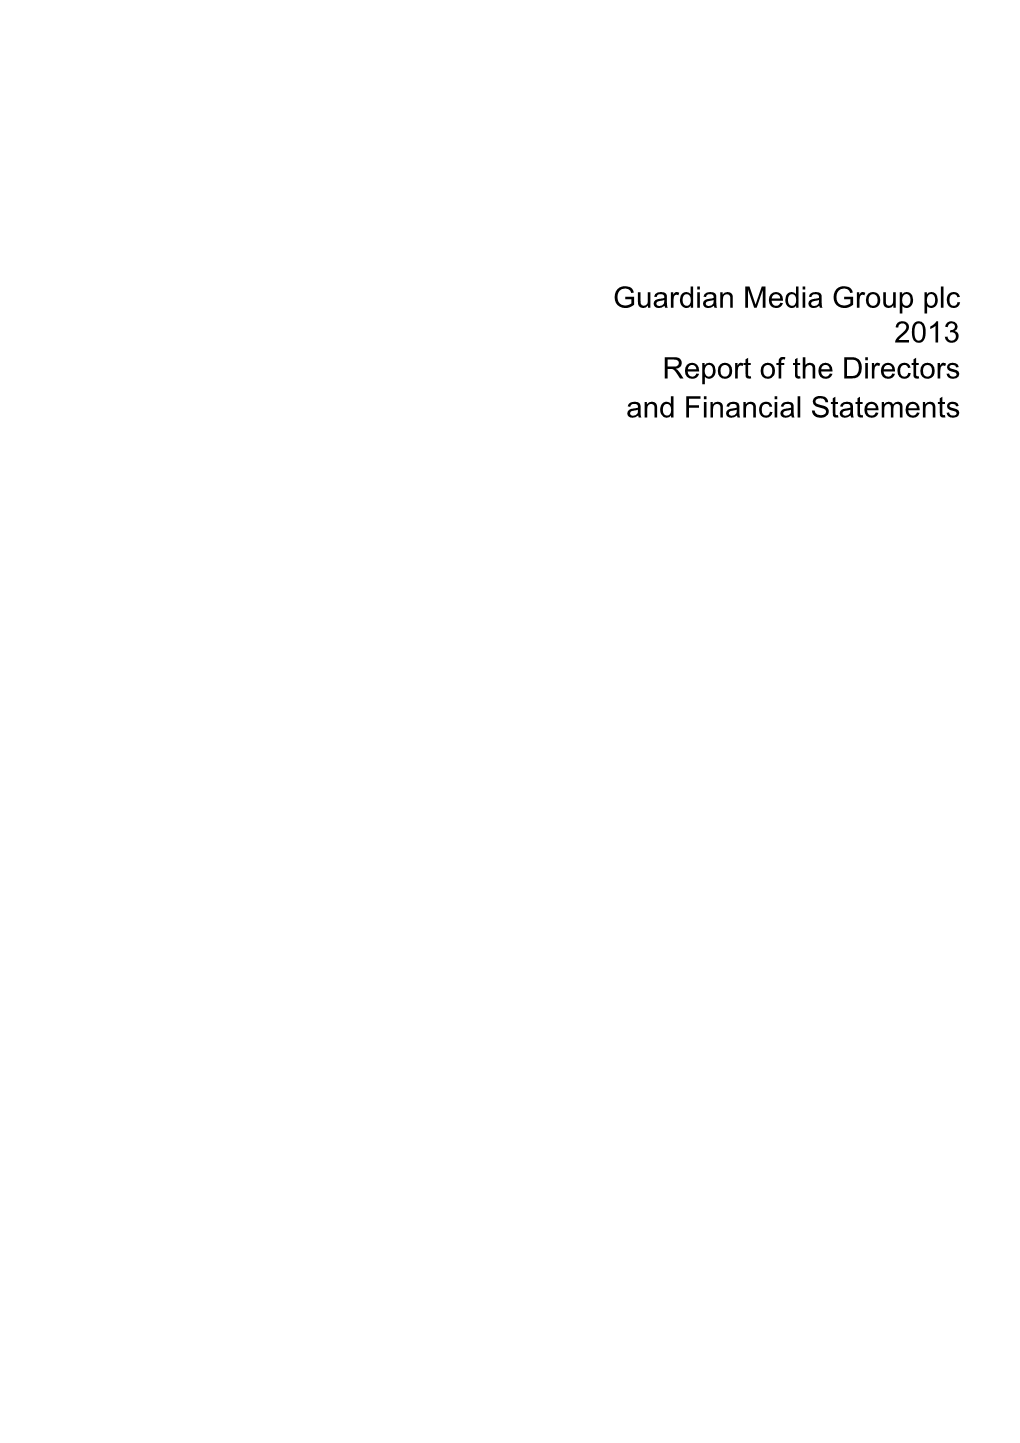 Guardian Media Group Plc 2013 Report of the Directors and Financial Statements Guardian Media Group Plc Page 2 Registered No